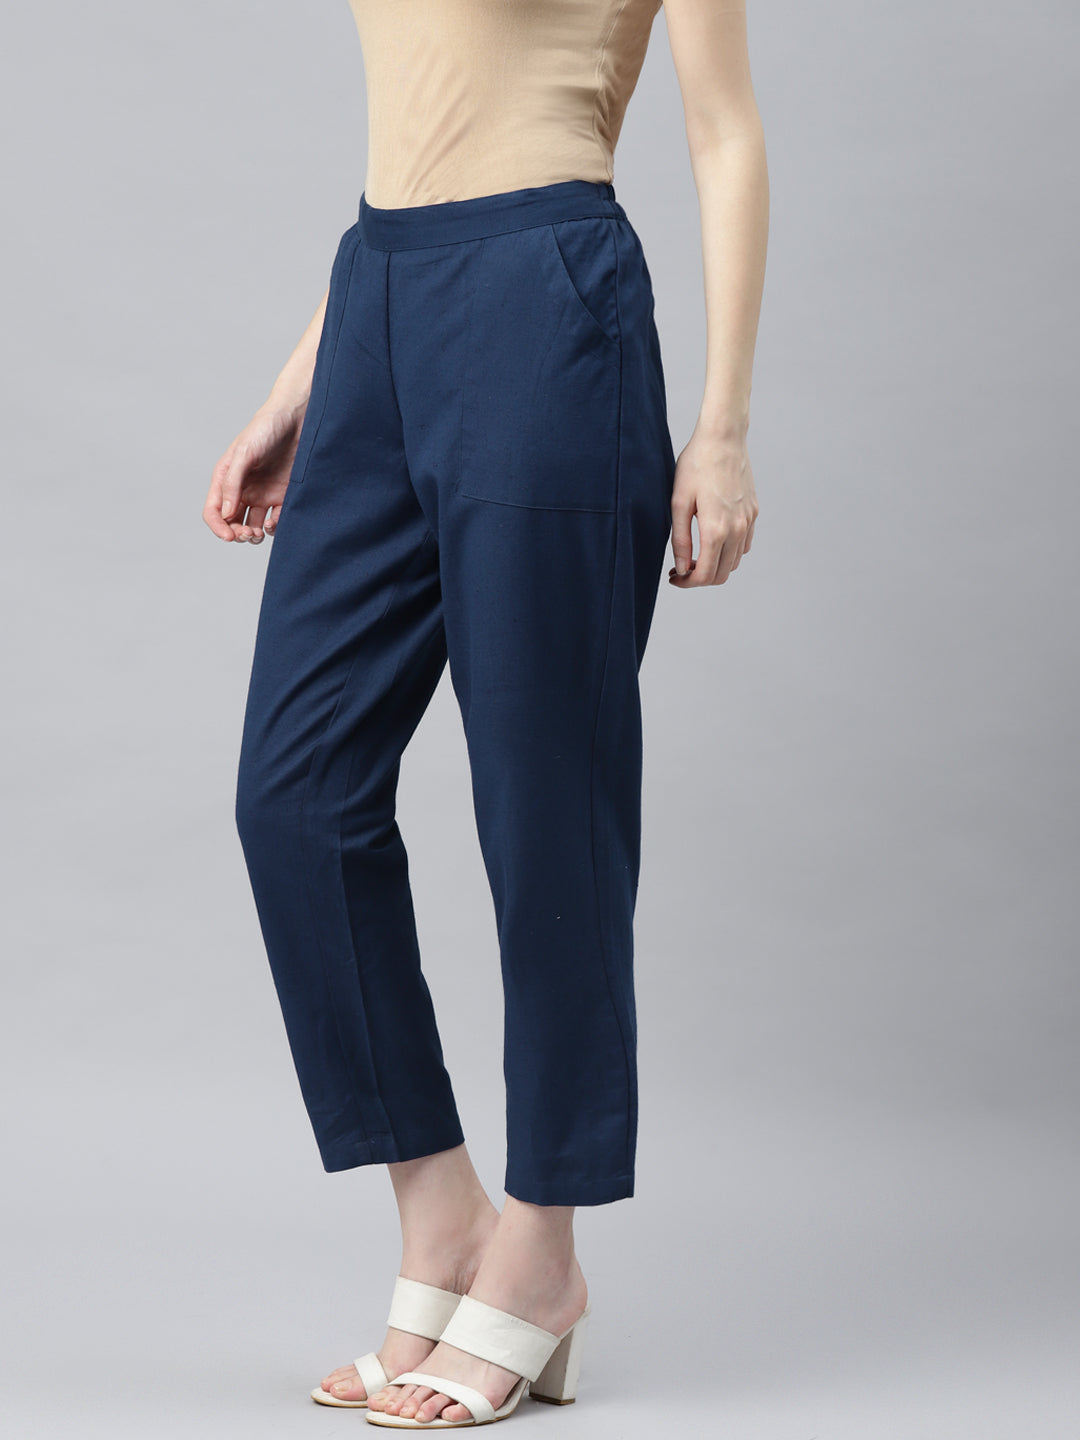 Ladies' Recycled Polyester Tapered Pants | 無印良品 MUJI